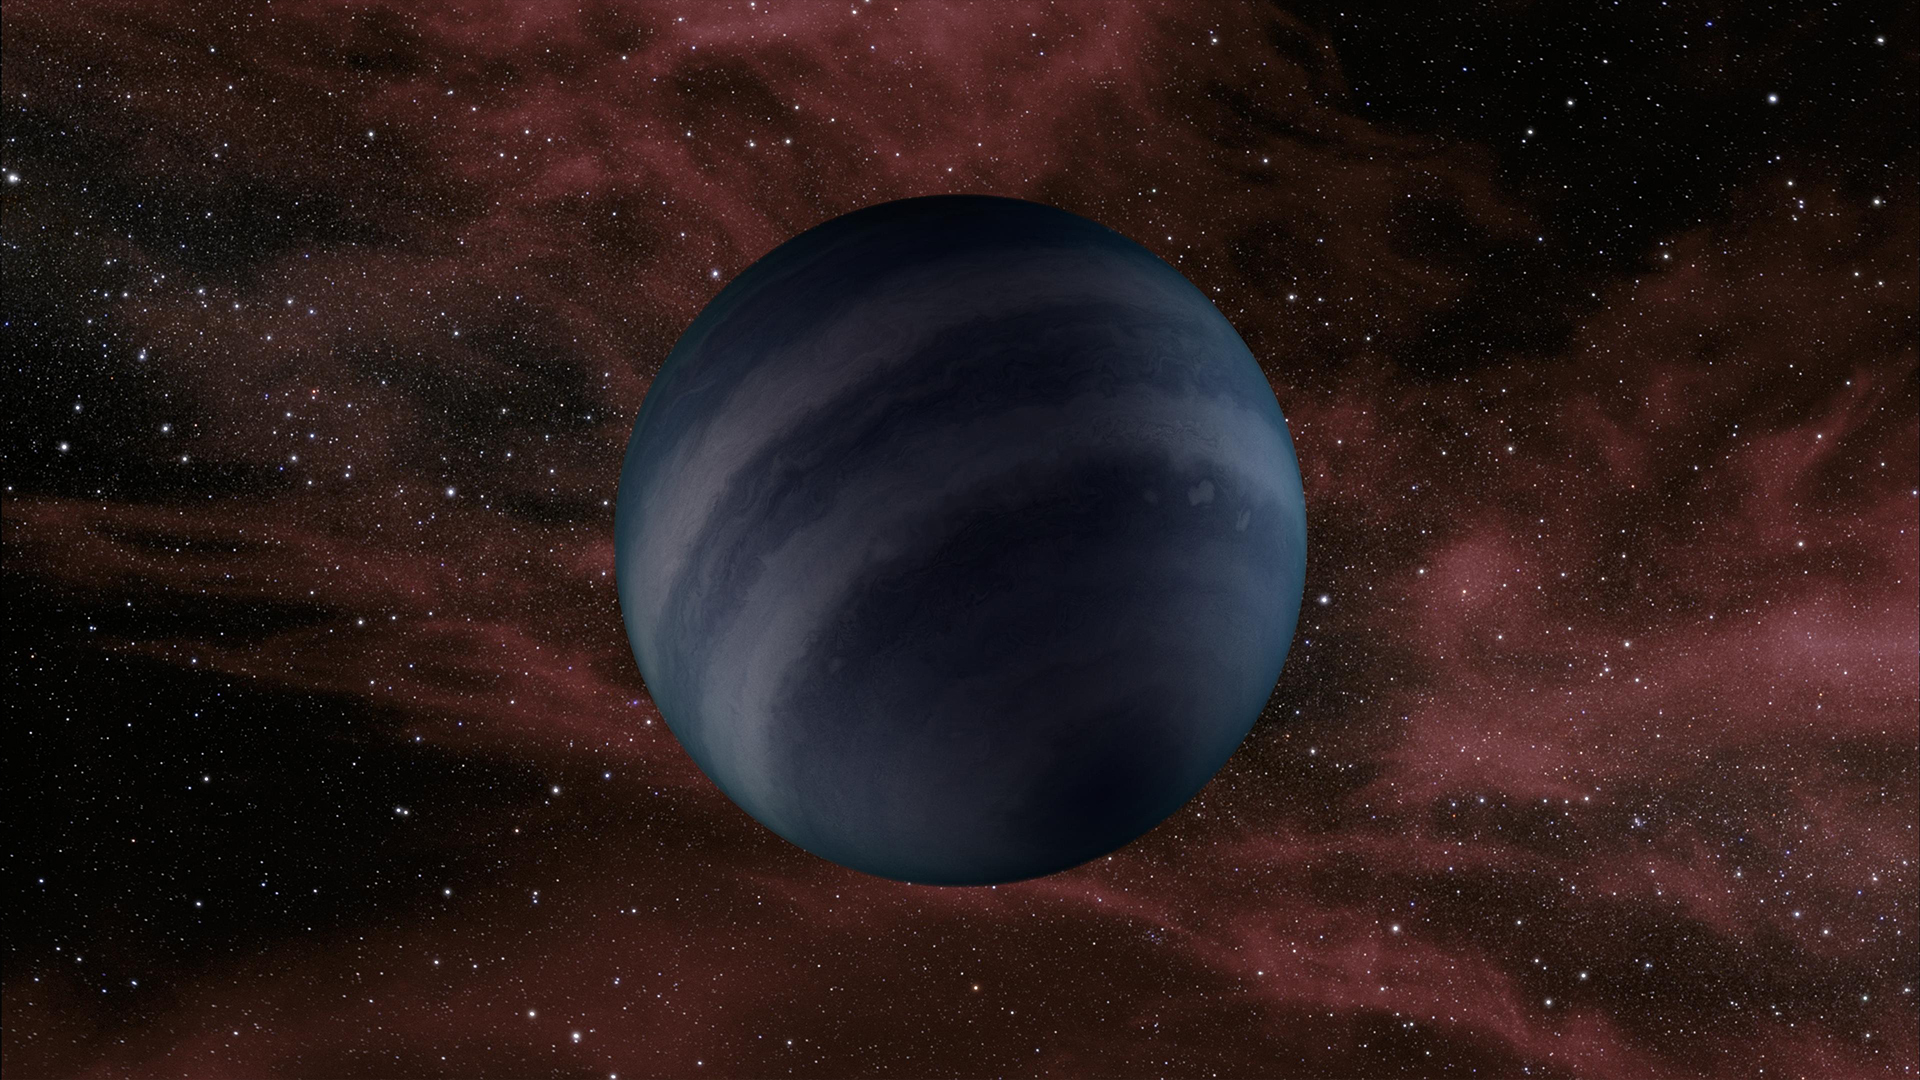 Drawing of free-floating brown dwarf, or failed star.